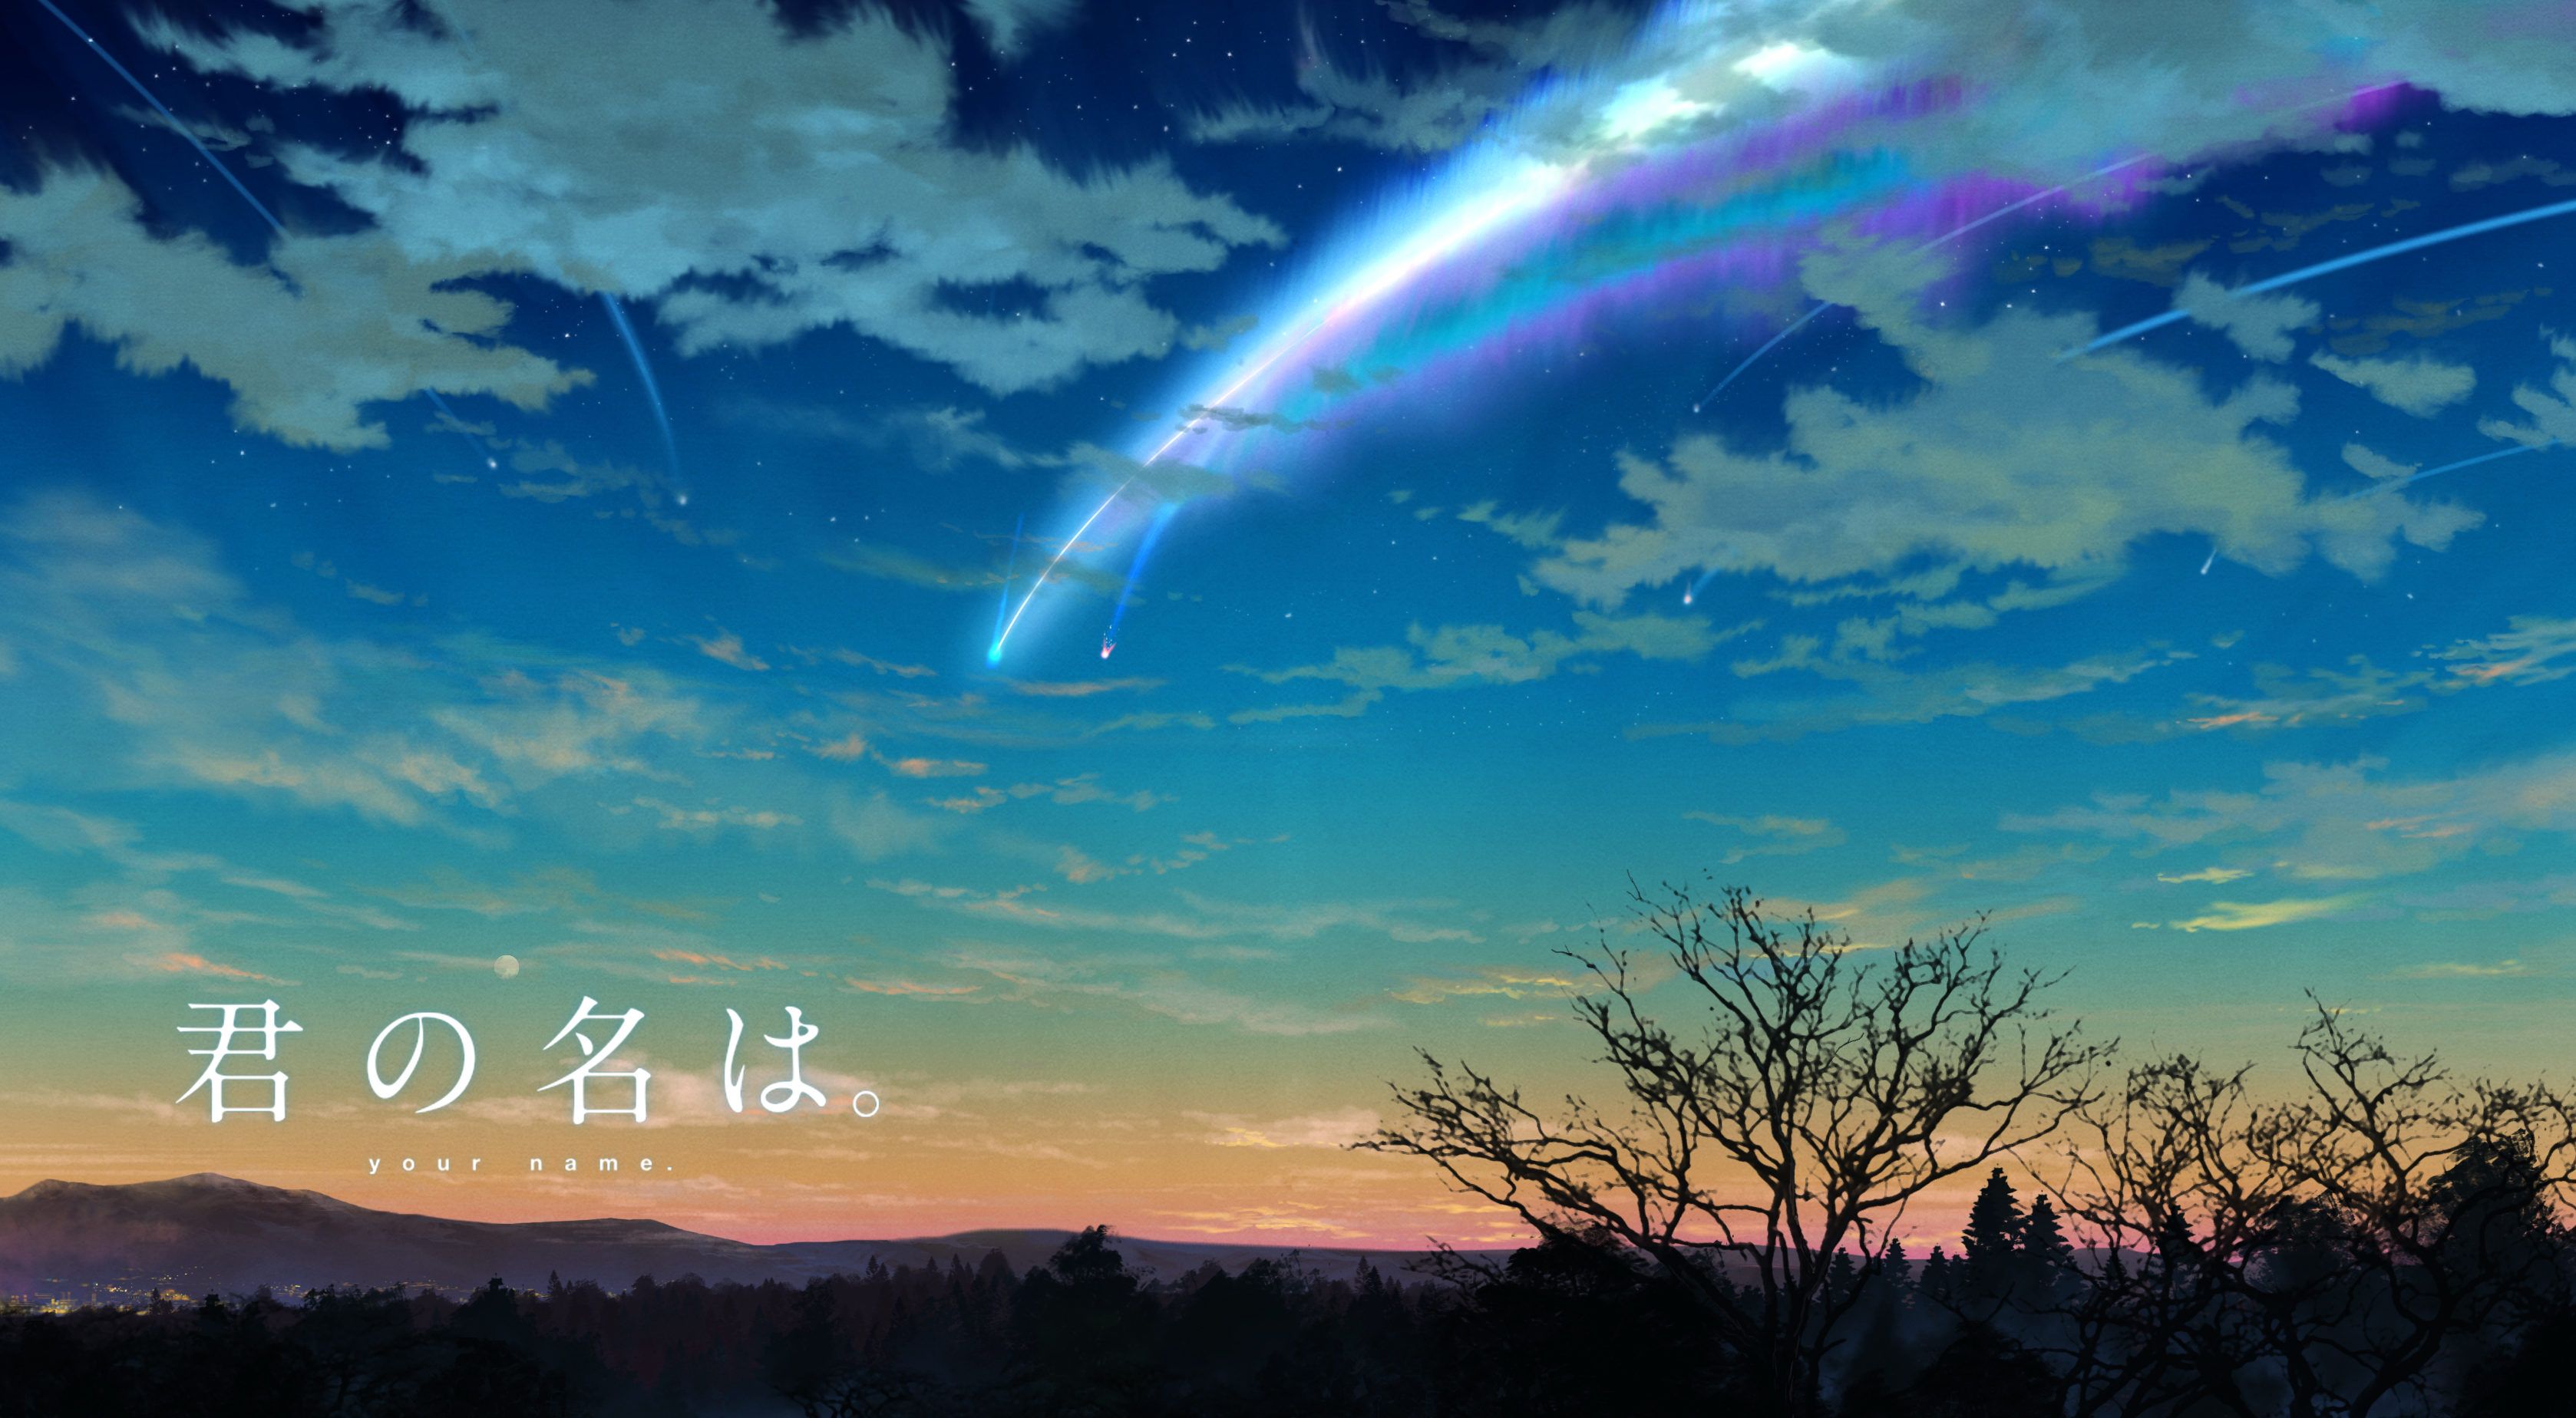 your name anime wallpaper,sky,nature,cloud,natural landscape,atmosphere